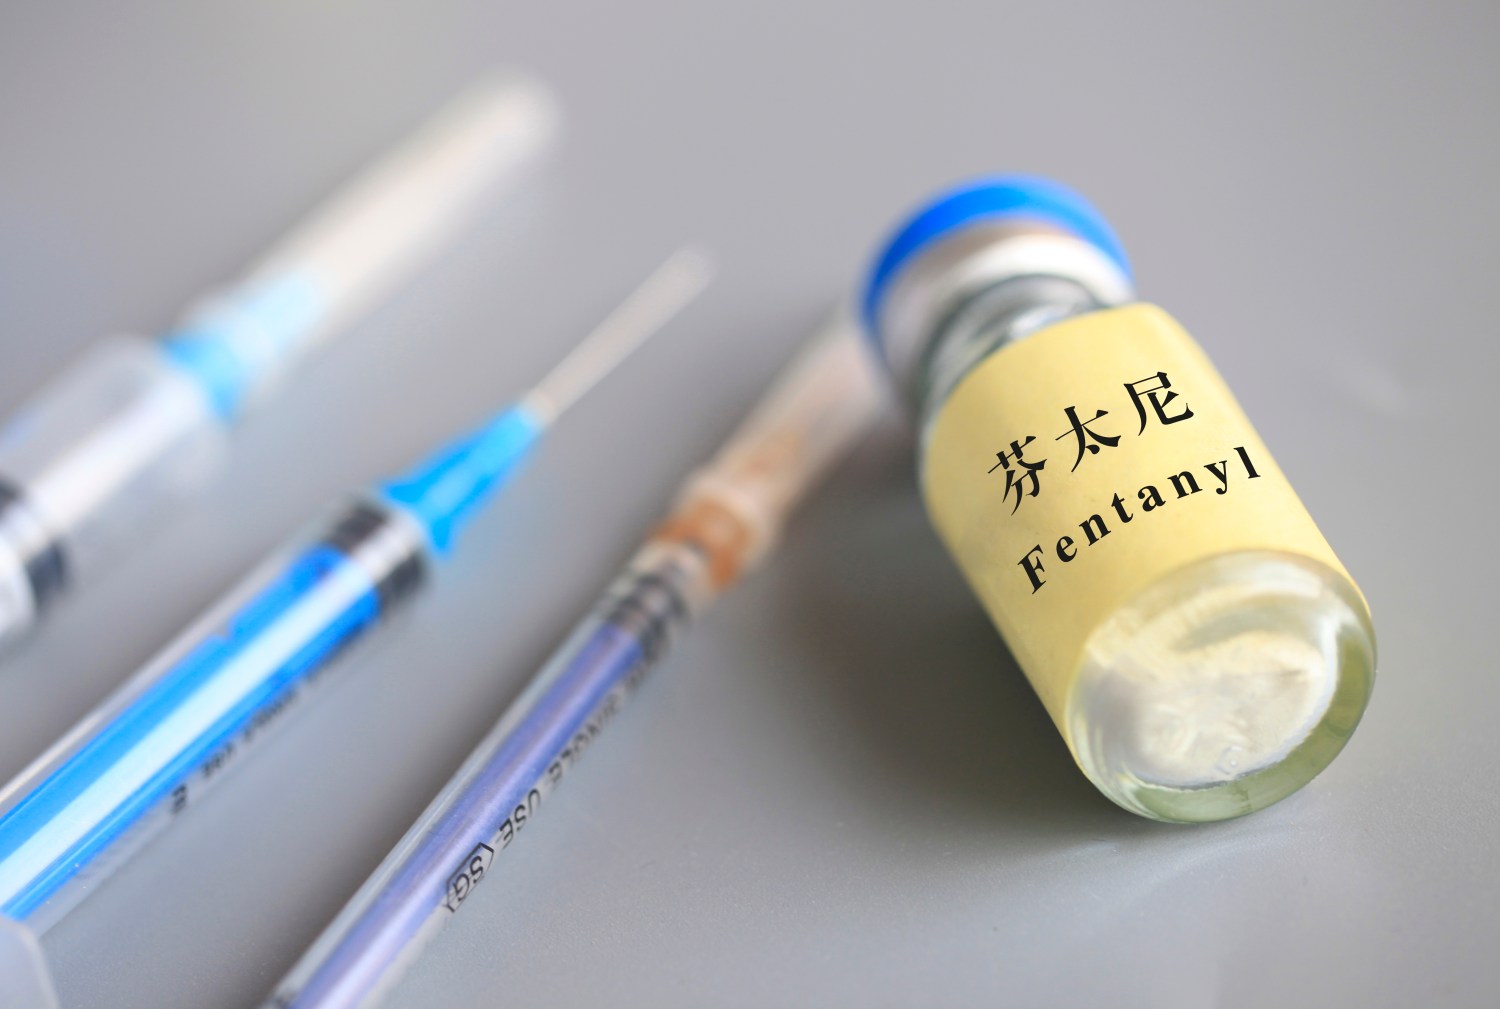 --FILE--A bottle of Fentanyl pharmaceuticals is displayed in Anyang city, central China's Henan province, 12 November 2018.China will add fentanyl-related substances to a supplementary list of controlled narcotic drugs and psychotropic substances with non-medical use since May 1. The decision was announced Monday in a joint statement by the Ministry of Public Security, the National Health Commission and the National Medical Products Administration. Fentanyl and its analogues that were previously included in the list of controlled narcotic drugs and psychotropic substances, as well as the related substances in the supplementary list, will remain to be controlled according to relevant regulations, the statement said.No Use China. No Use France.